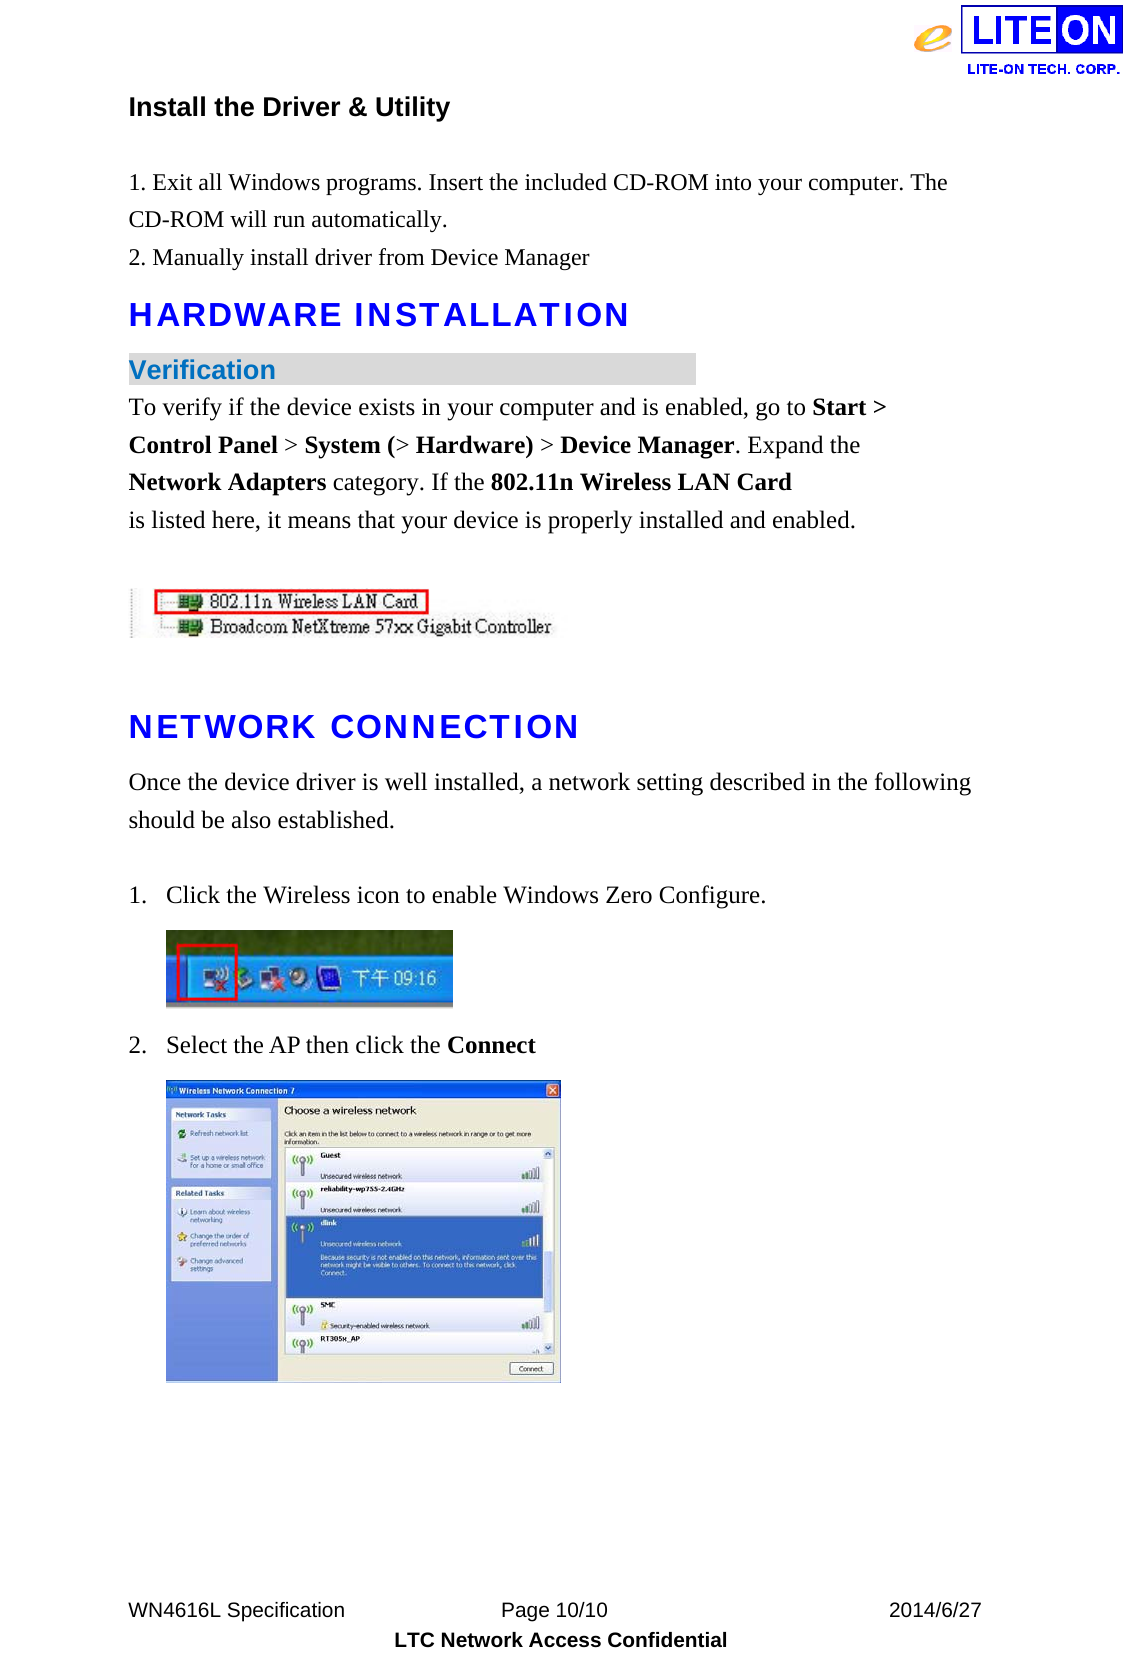  WN4616L Specification               Page 10/10                           2014/6/27 LTC Network Access Confidential Install the Driver &amp; Utility  1. Exit all Windows programs. Insert the included CD-ROM into your computer. The CD-ROM will run automatically.   2. Manually install driver from Device Manager   HARDWARE INSTALLATION Verification                                To verify if the device exists in your computer and is enabled, go to Start &gt; Control Panel &gt; System (&gt; Hardware) &gt; Device Manager. Expand the Network Adapters category. If the 802.11n Wireless LAN Card is listed here, it means that your device is properly installed and enabled.    NETWORK CONNECTION Once the device driver is well installed, a network setting described in the following should be also established.  1. Click the Wireless icon to enable Windows Zero Configure.  2. Select the AP then click the Connect   